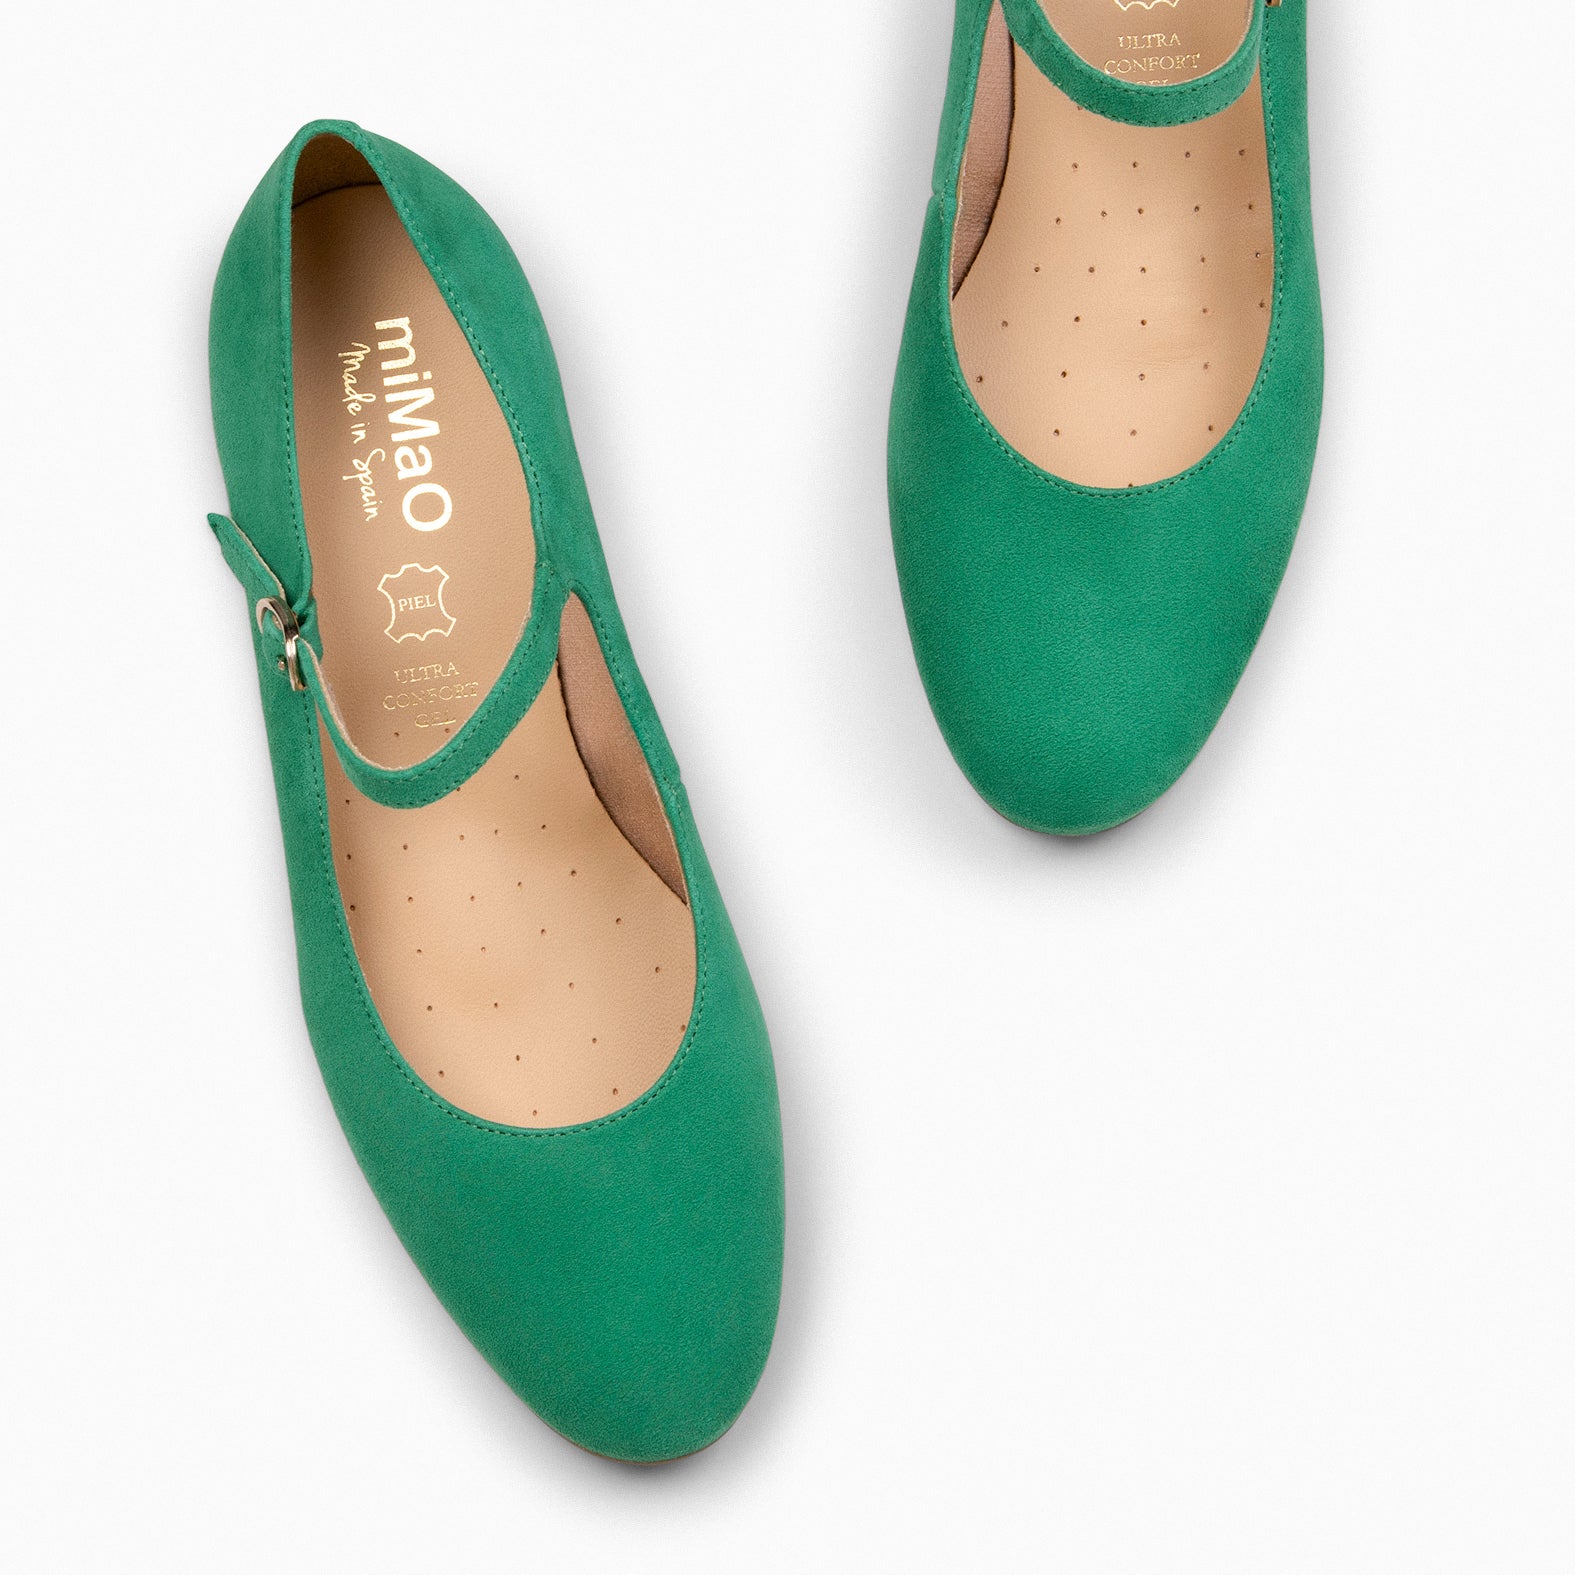 NORA – GREEN Mary-Janes with low heel 